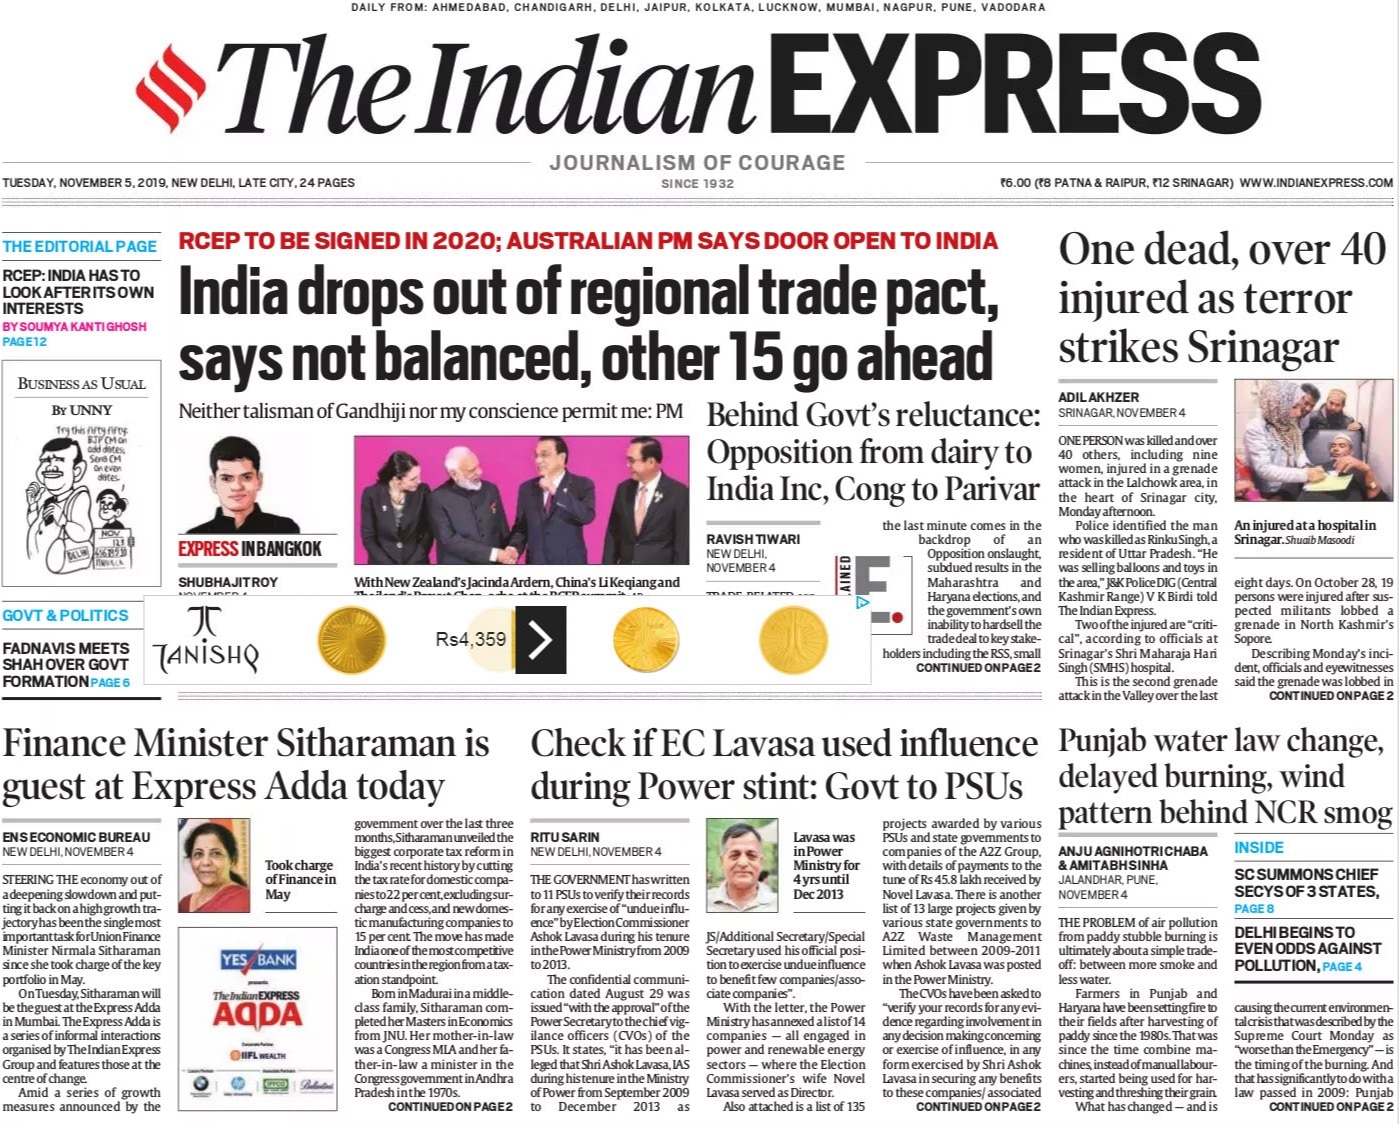 Newspaper Headlines: India Opting Out Of RCEP, Says Concerns Not Addressed